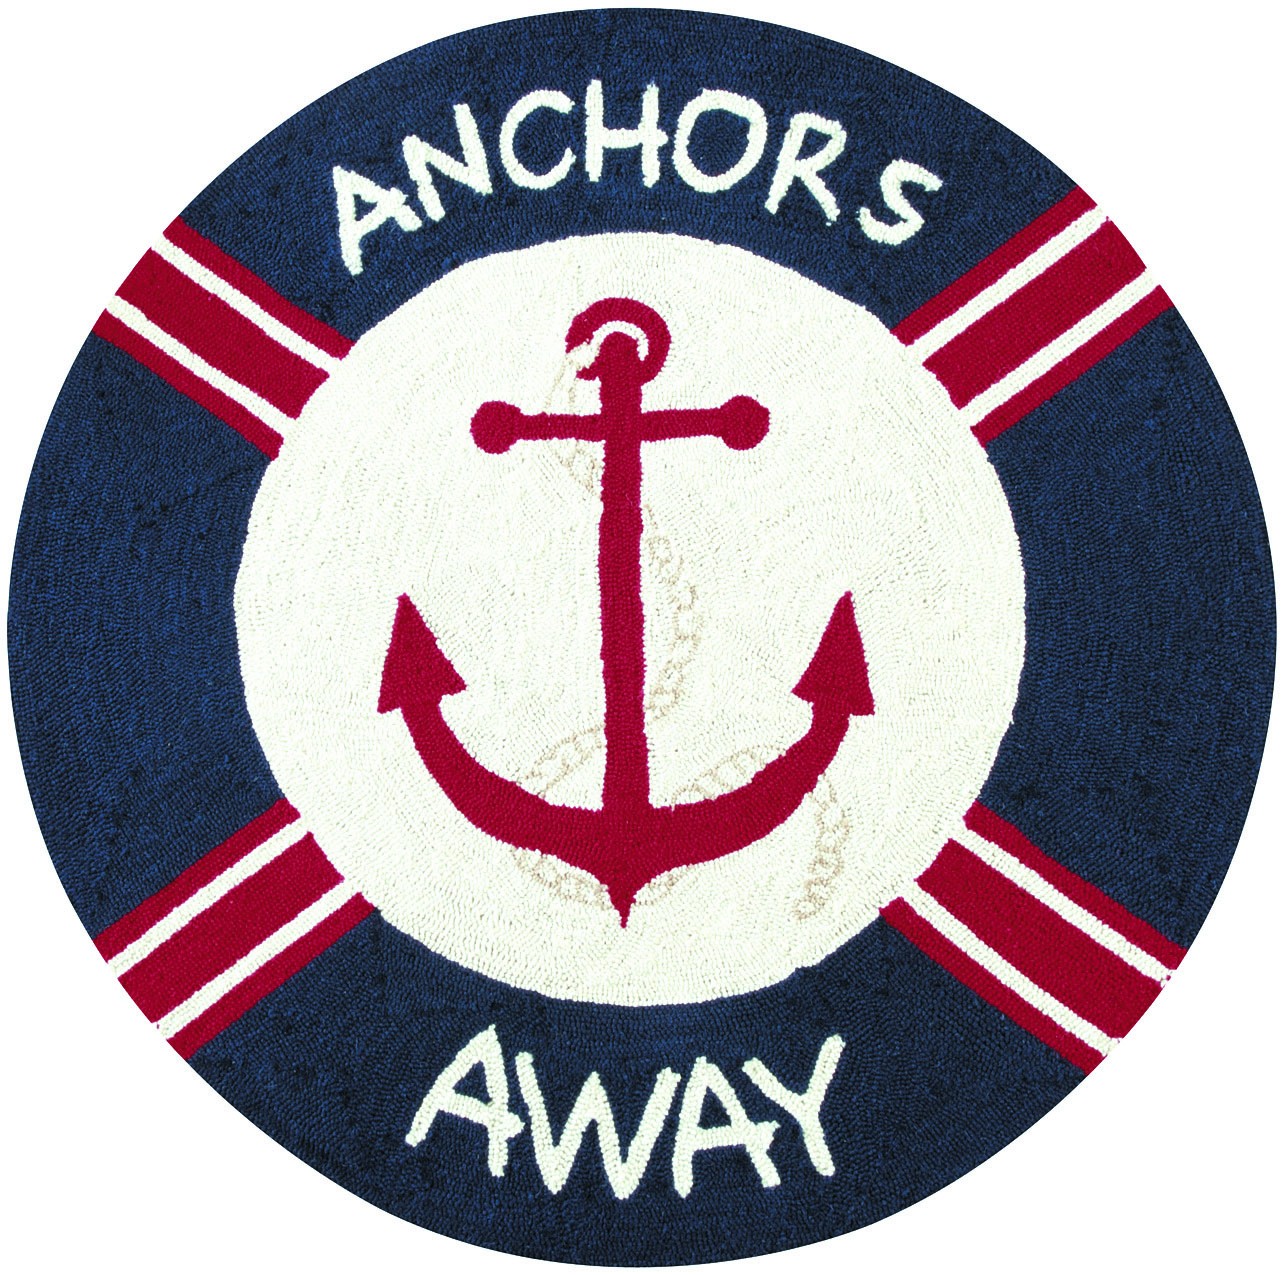 Free Images Of Anchors, Download Free Clip Art, Free Clip Art on Clipart Library